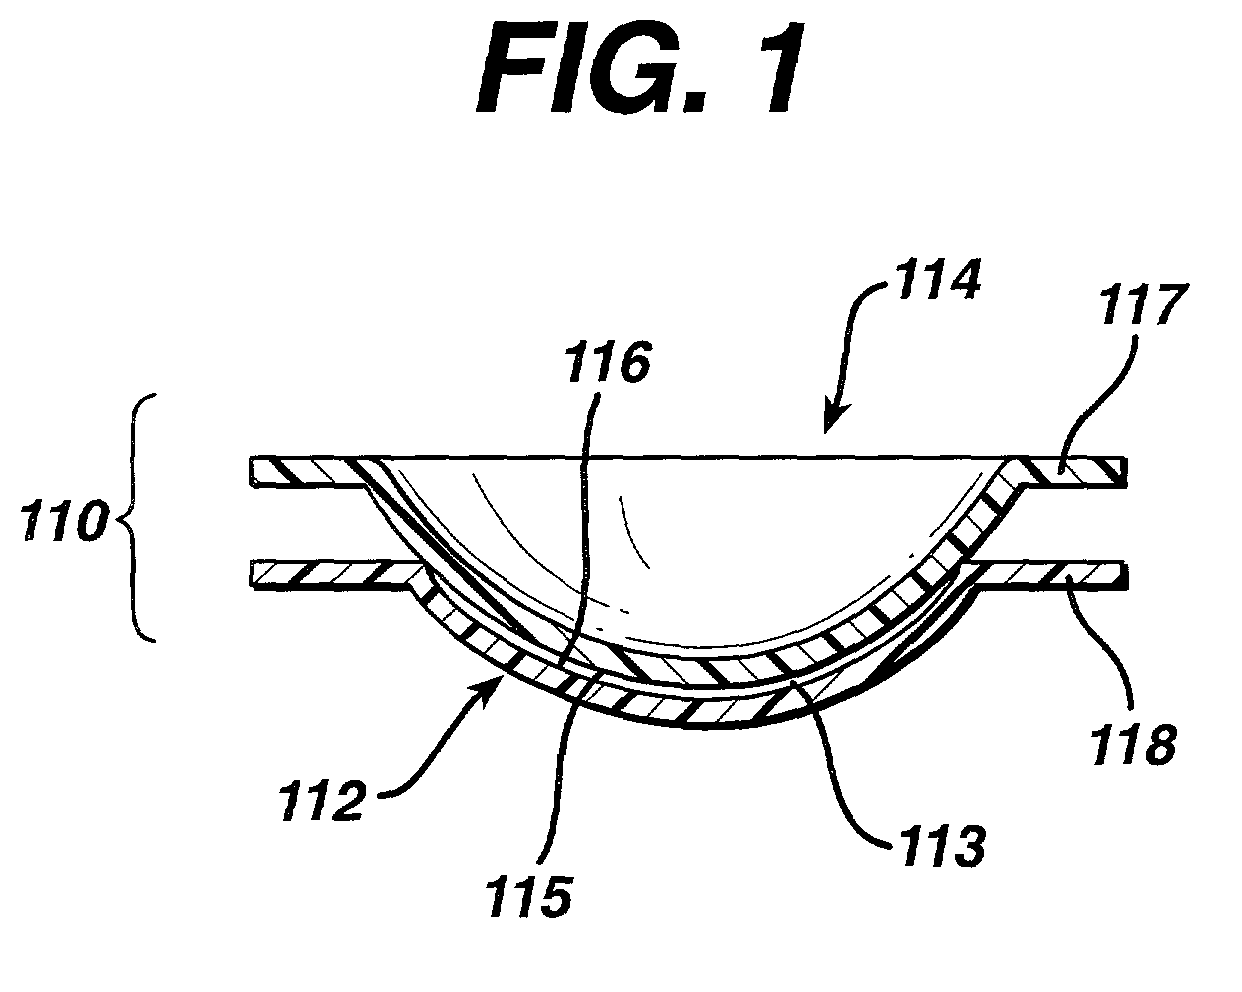 Shape memory polymer or alloy ophthalmic lens mold and methods of forming ophthalmic products